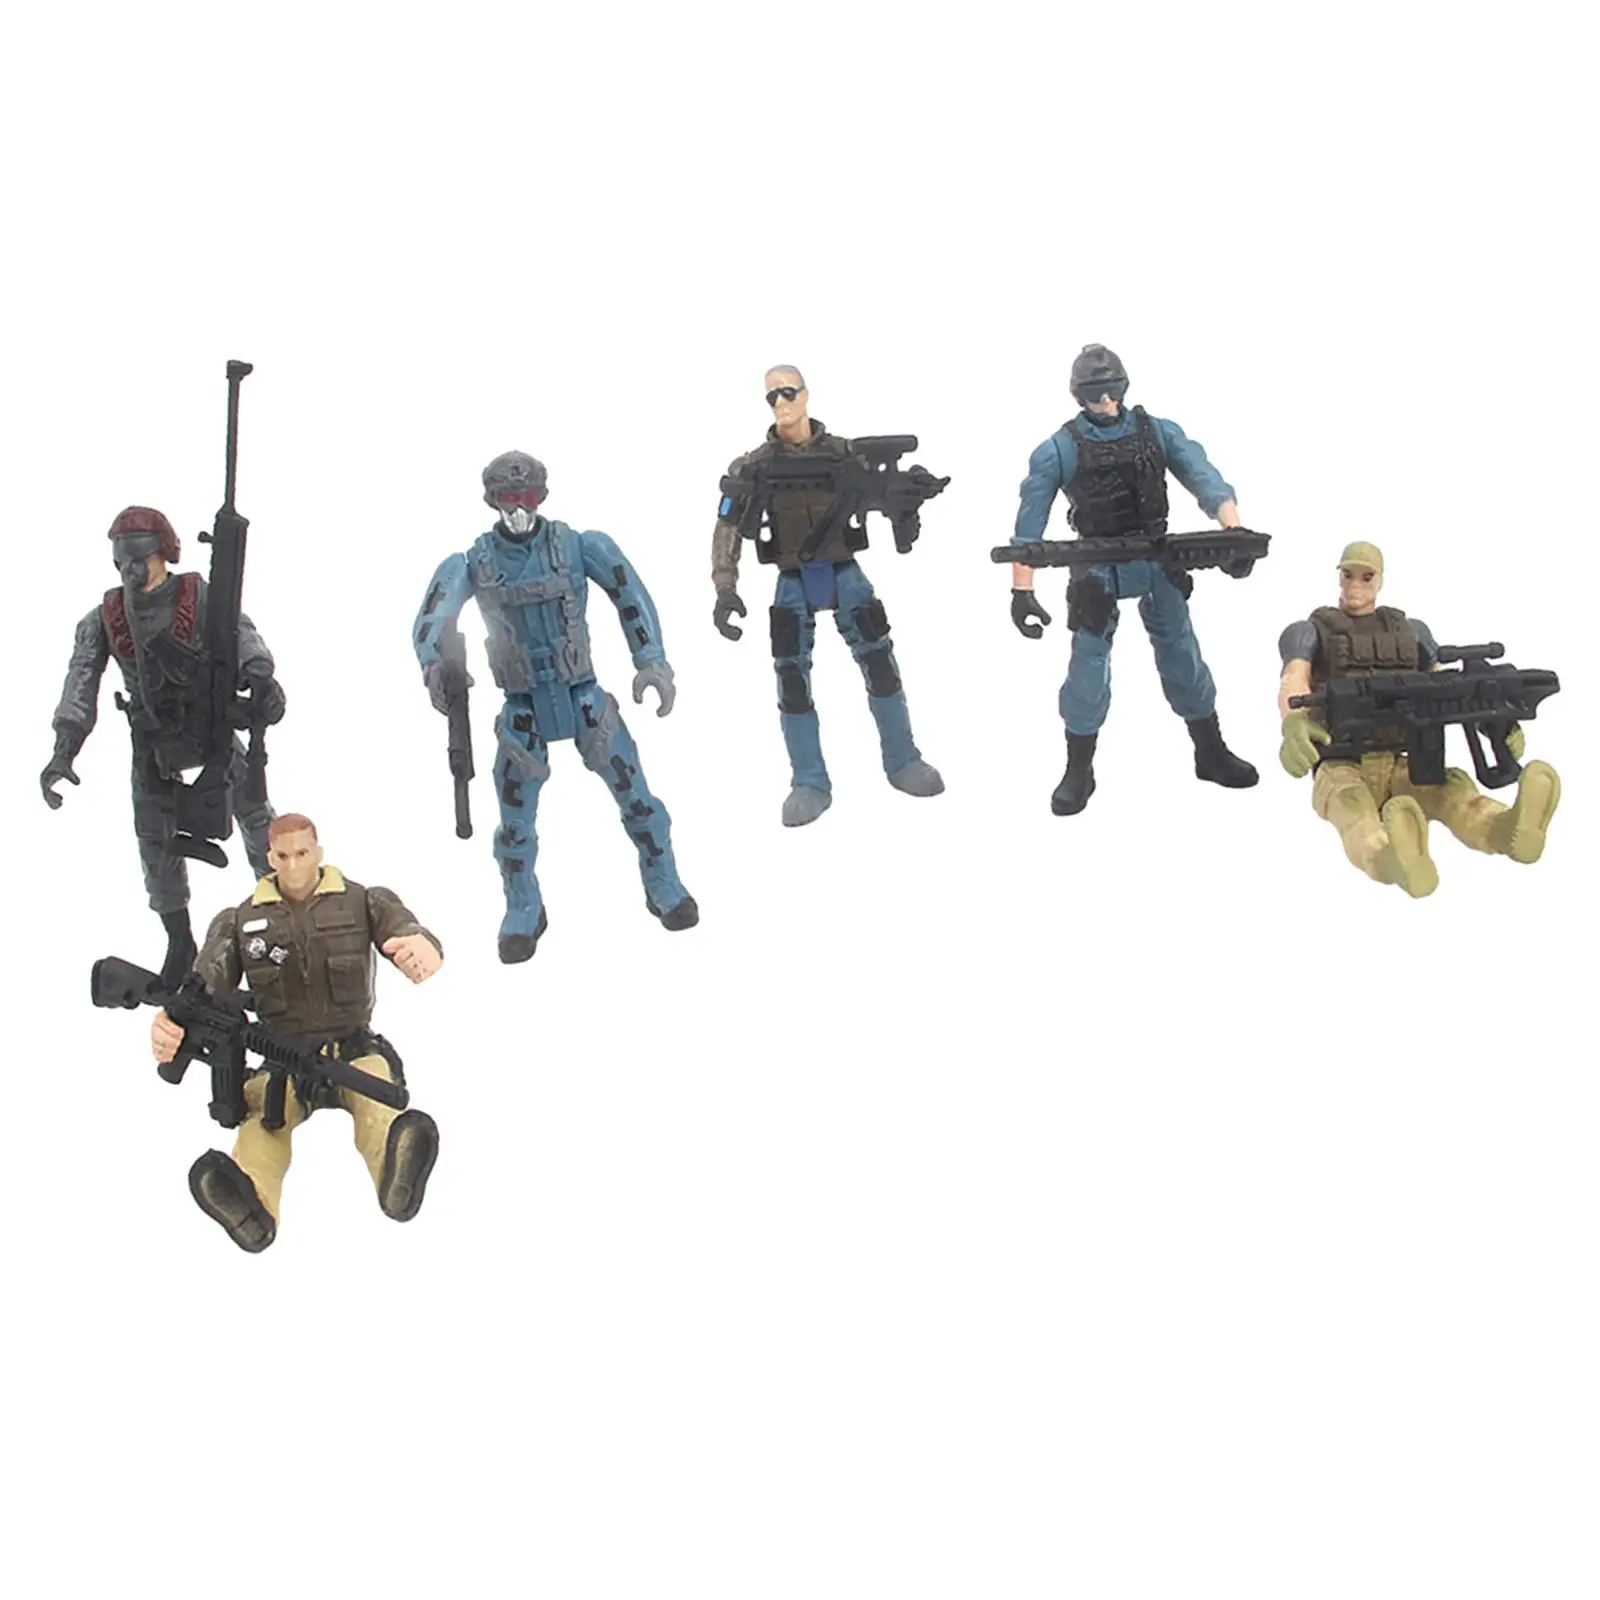 6Pcs 1/18 Scale Action Figures Removable Arm Legs Body Desktop Ornaments Collectible Playsets for Kids Teens Halloween Day Gifts